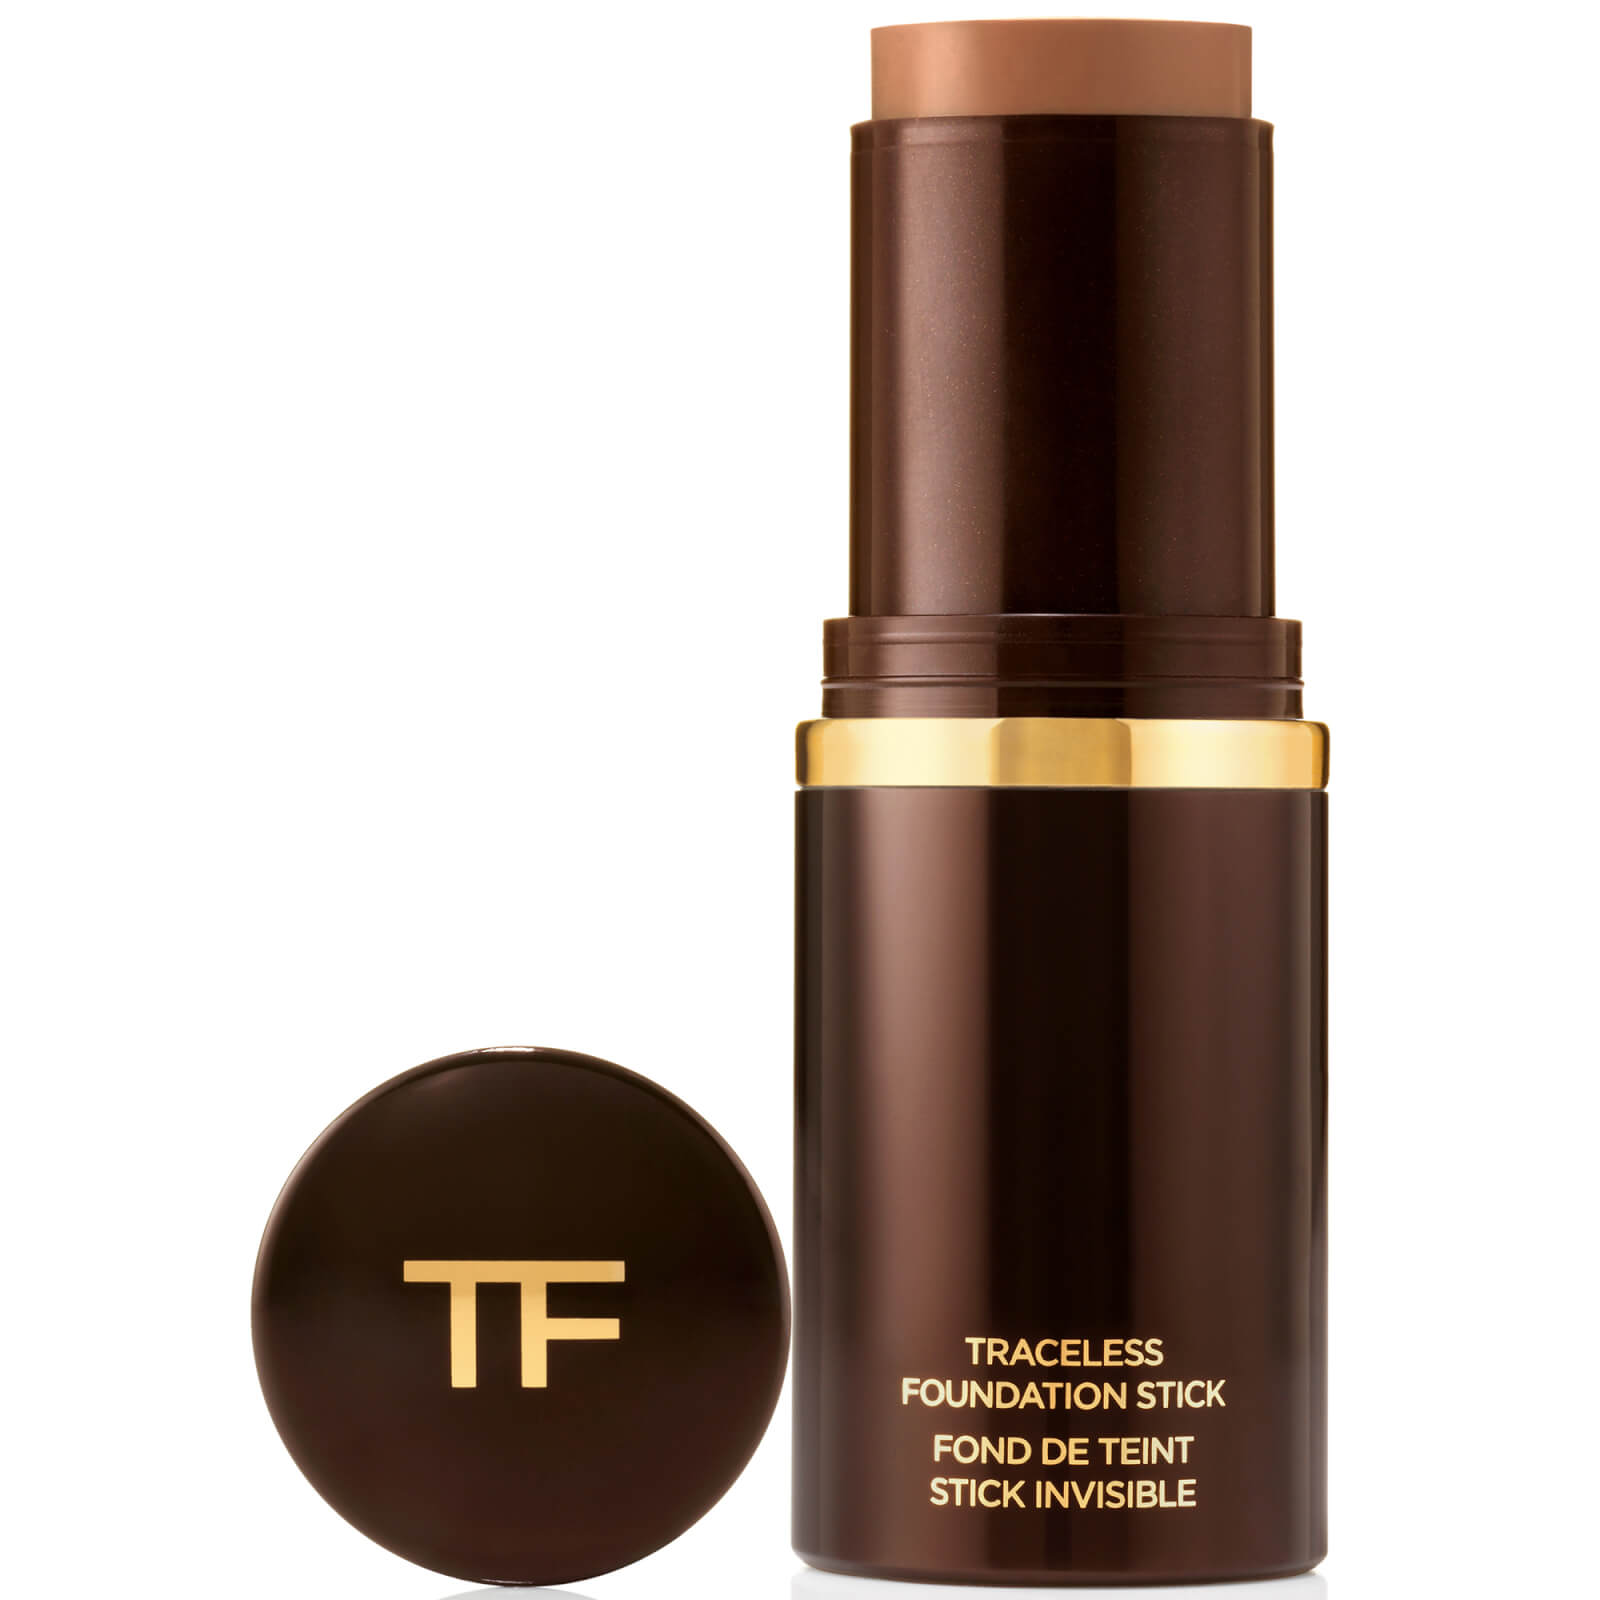 Photos - Foundation & Concealer Tom Ford Traceless Foundation Stick 15g  - 9.5 Warm Almond (Various Shades)